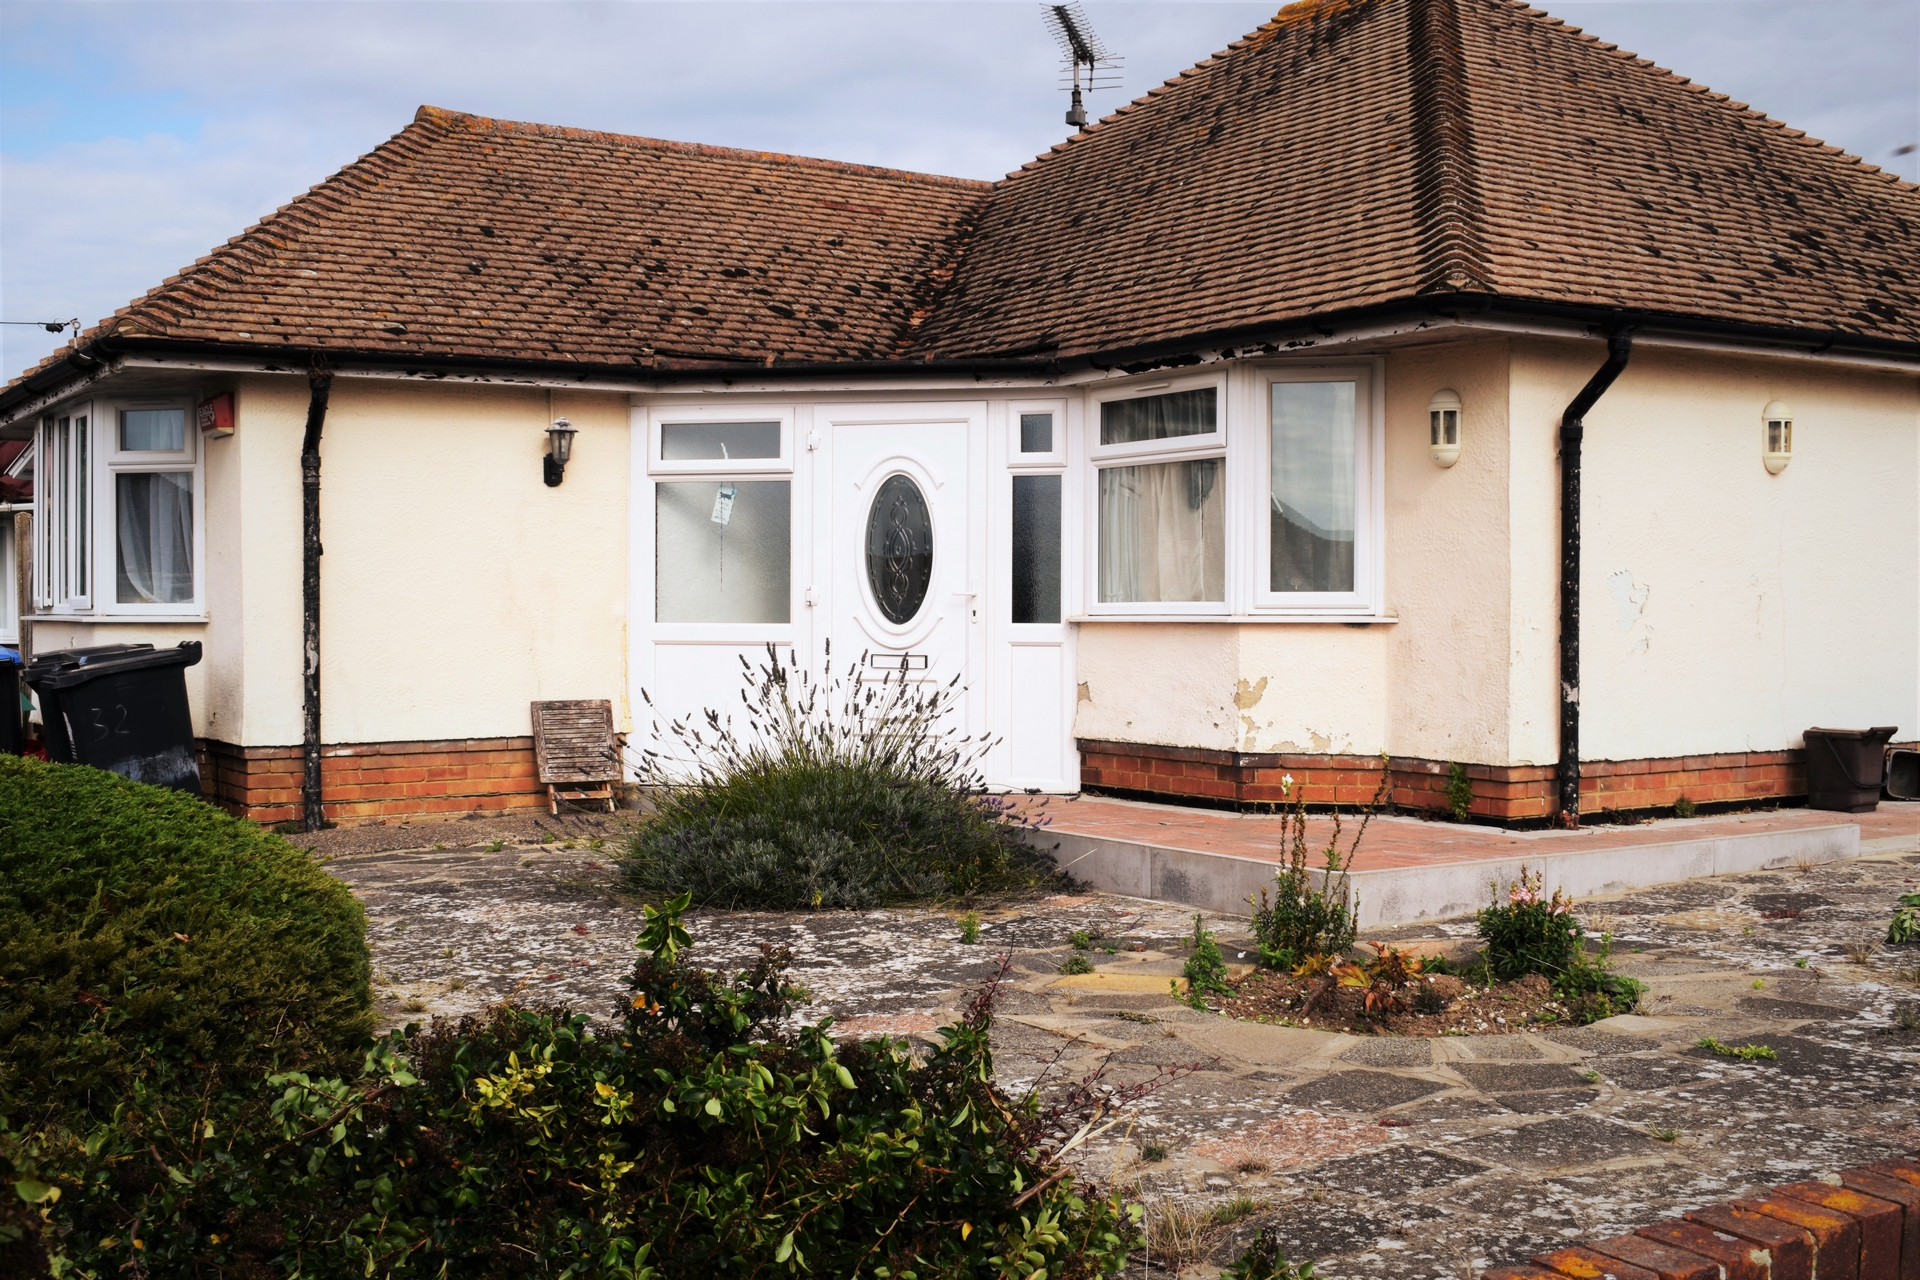 Birchington - 2 Bedroom Bungalow - �1,300 pcm    This detached 2 bedroom bungalow and garage located in the popular village of Birchington is available soon. 